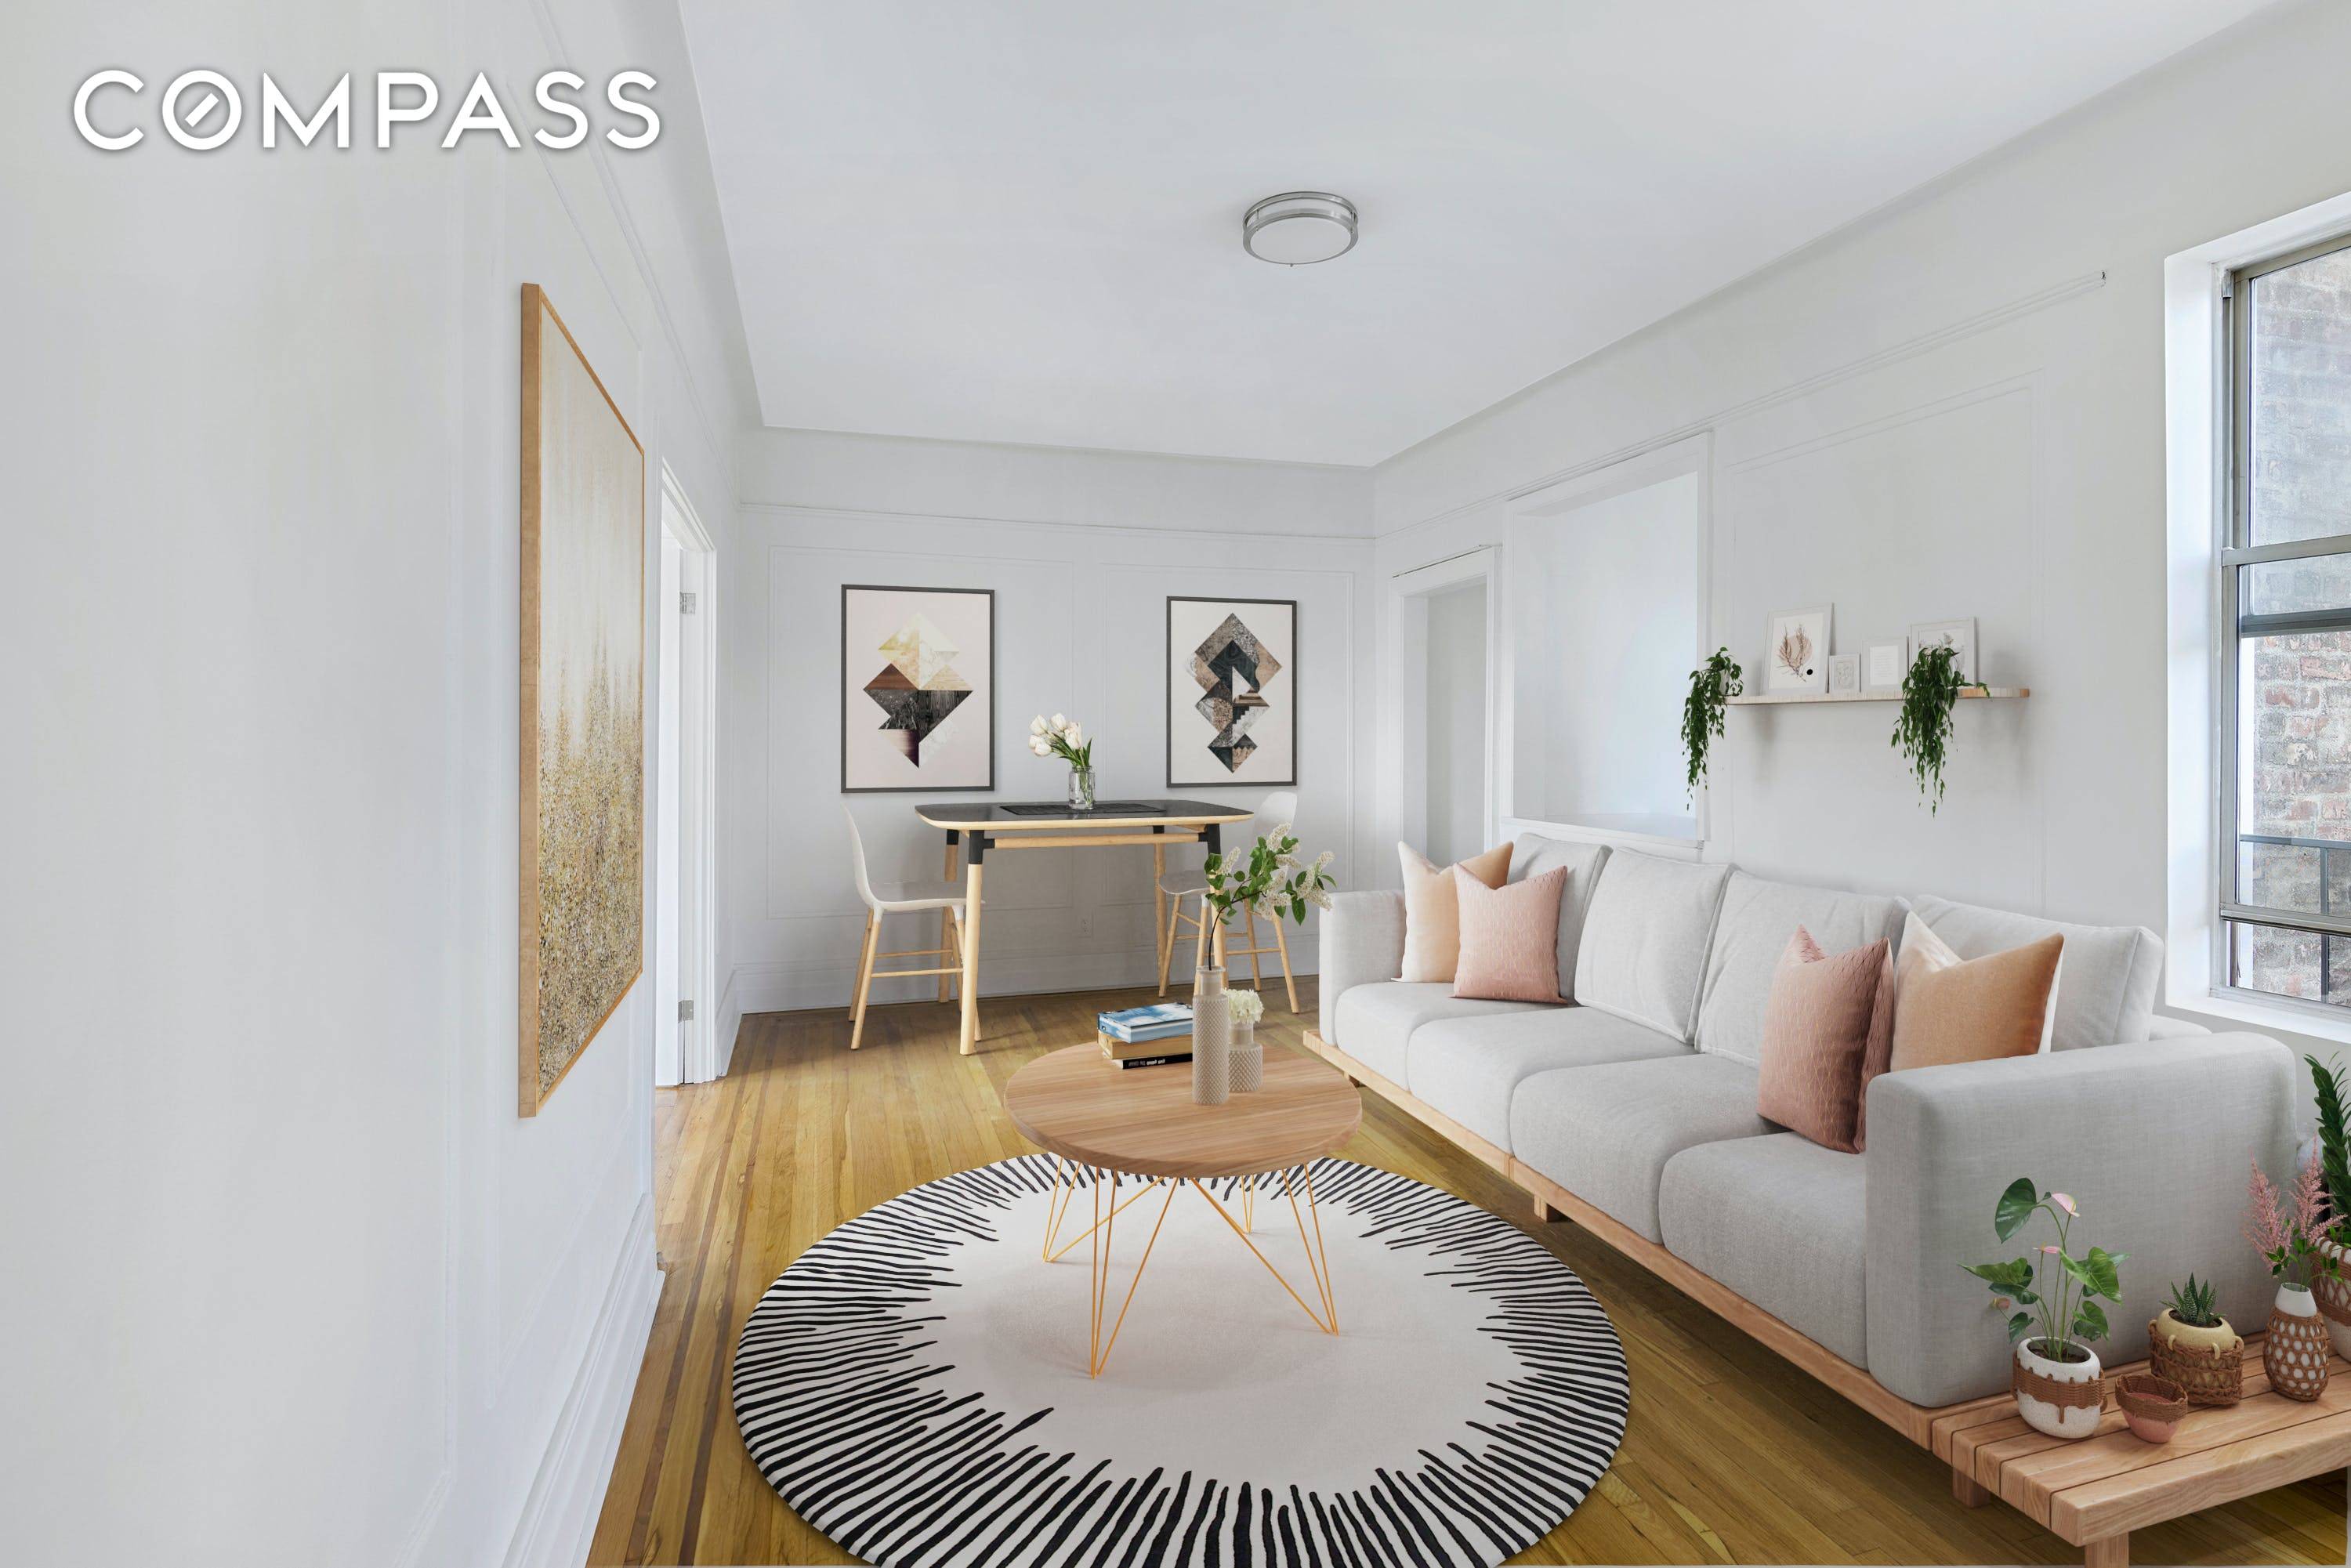 Sprawling true 3 bedroom, 1 bathroom apartment located inSouth Park Slope on the cusp of Gowanus.